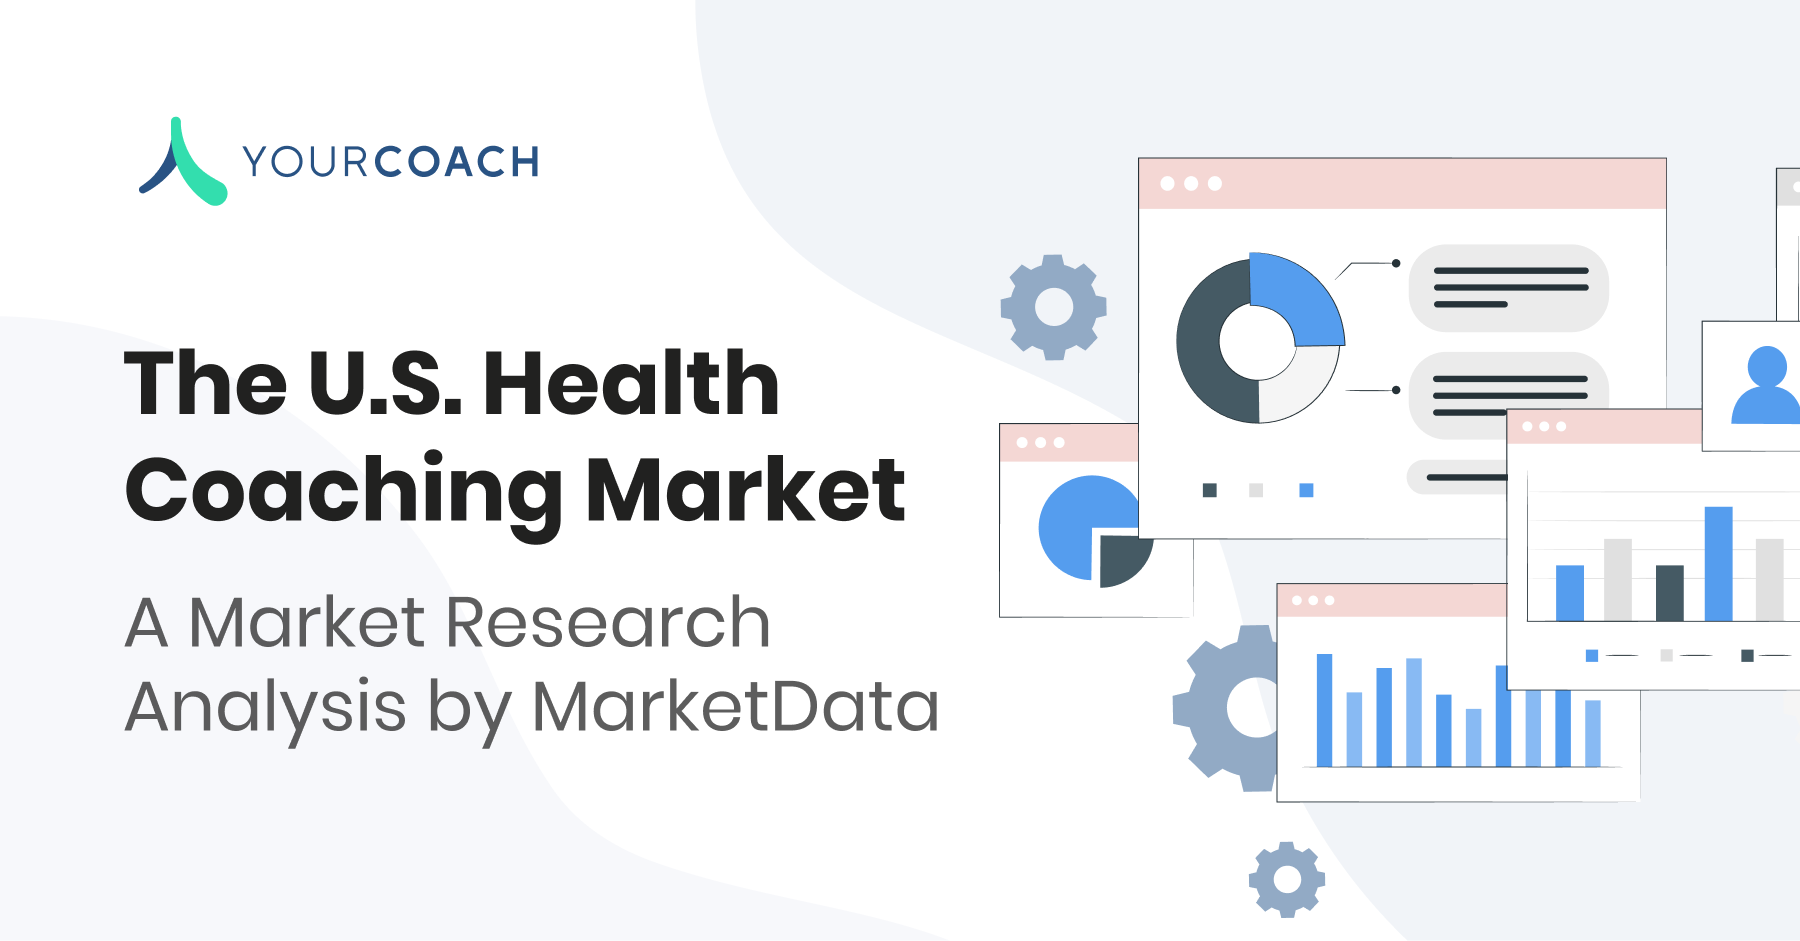 New Health Coaching Market Study Presents Encouraging Data on the Growth of the Health Coaching Industry